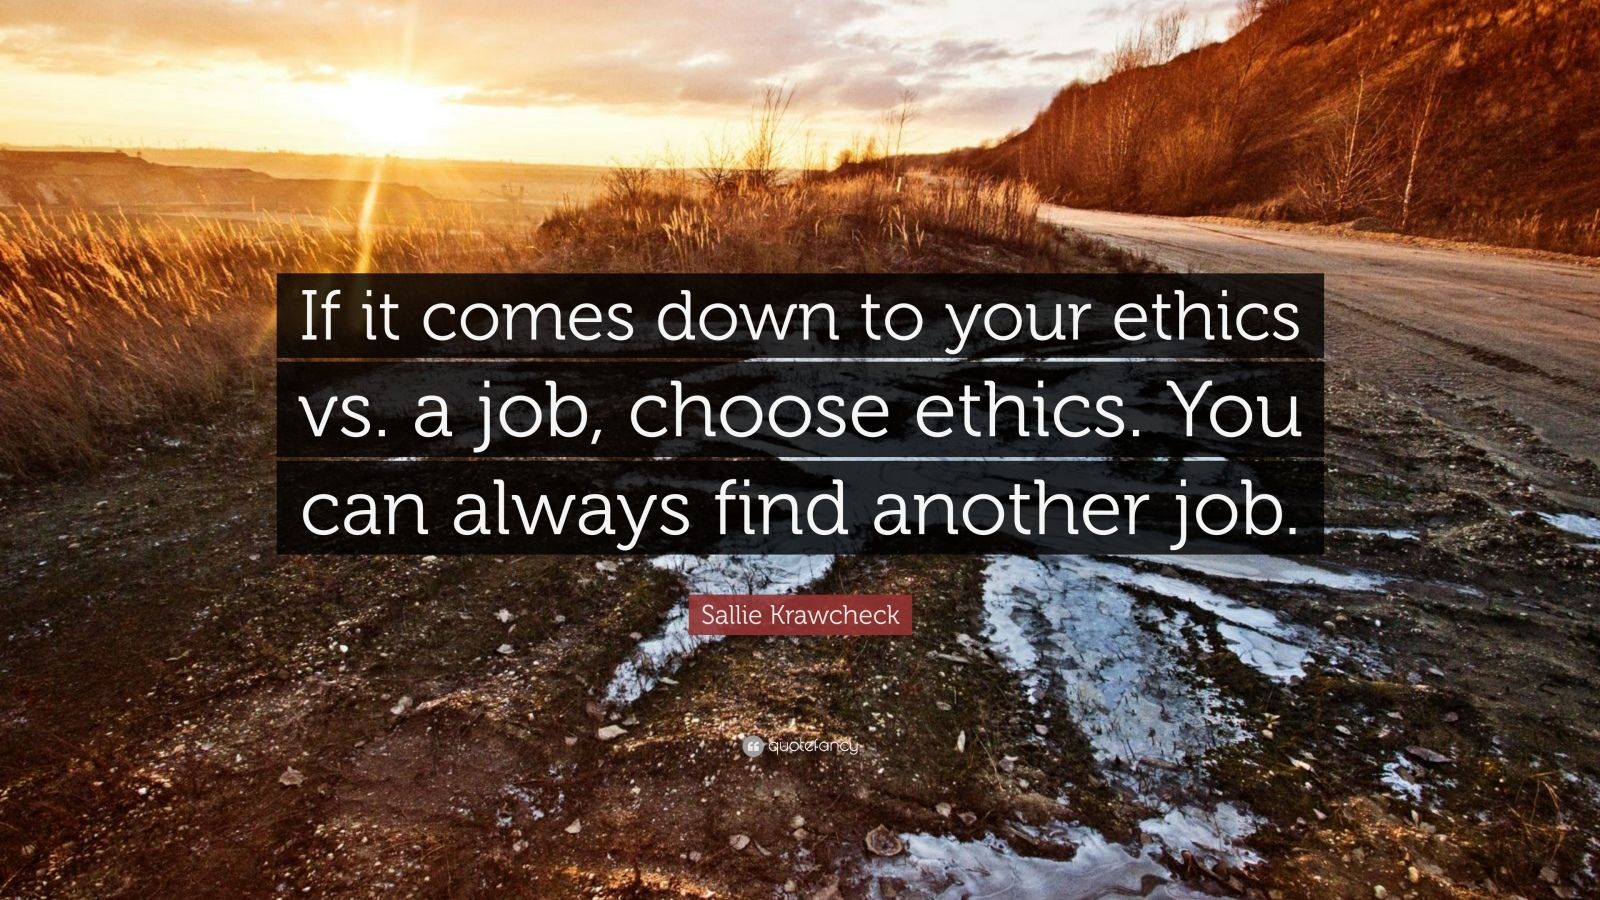 Sallie Krawcheck Quote: “If it comes down to your ethics vs. a job